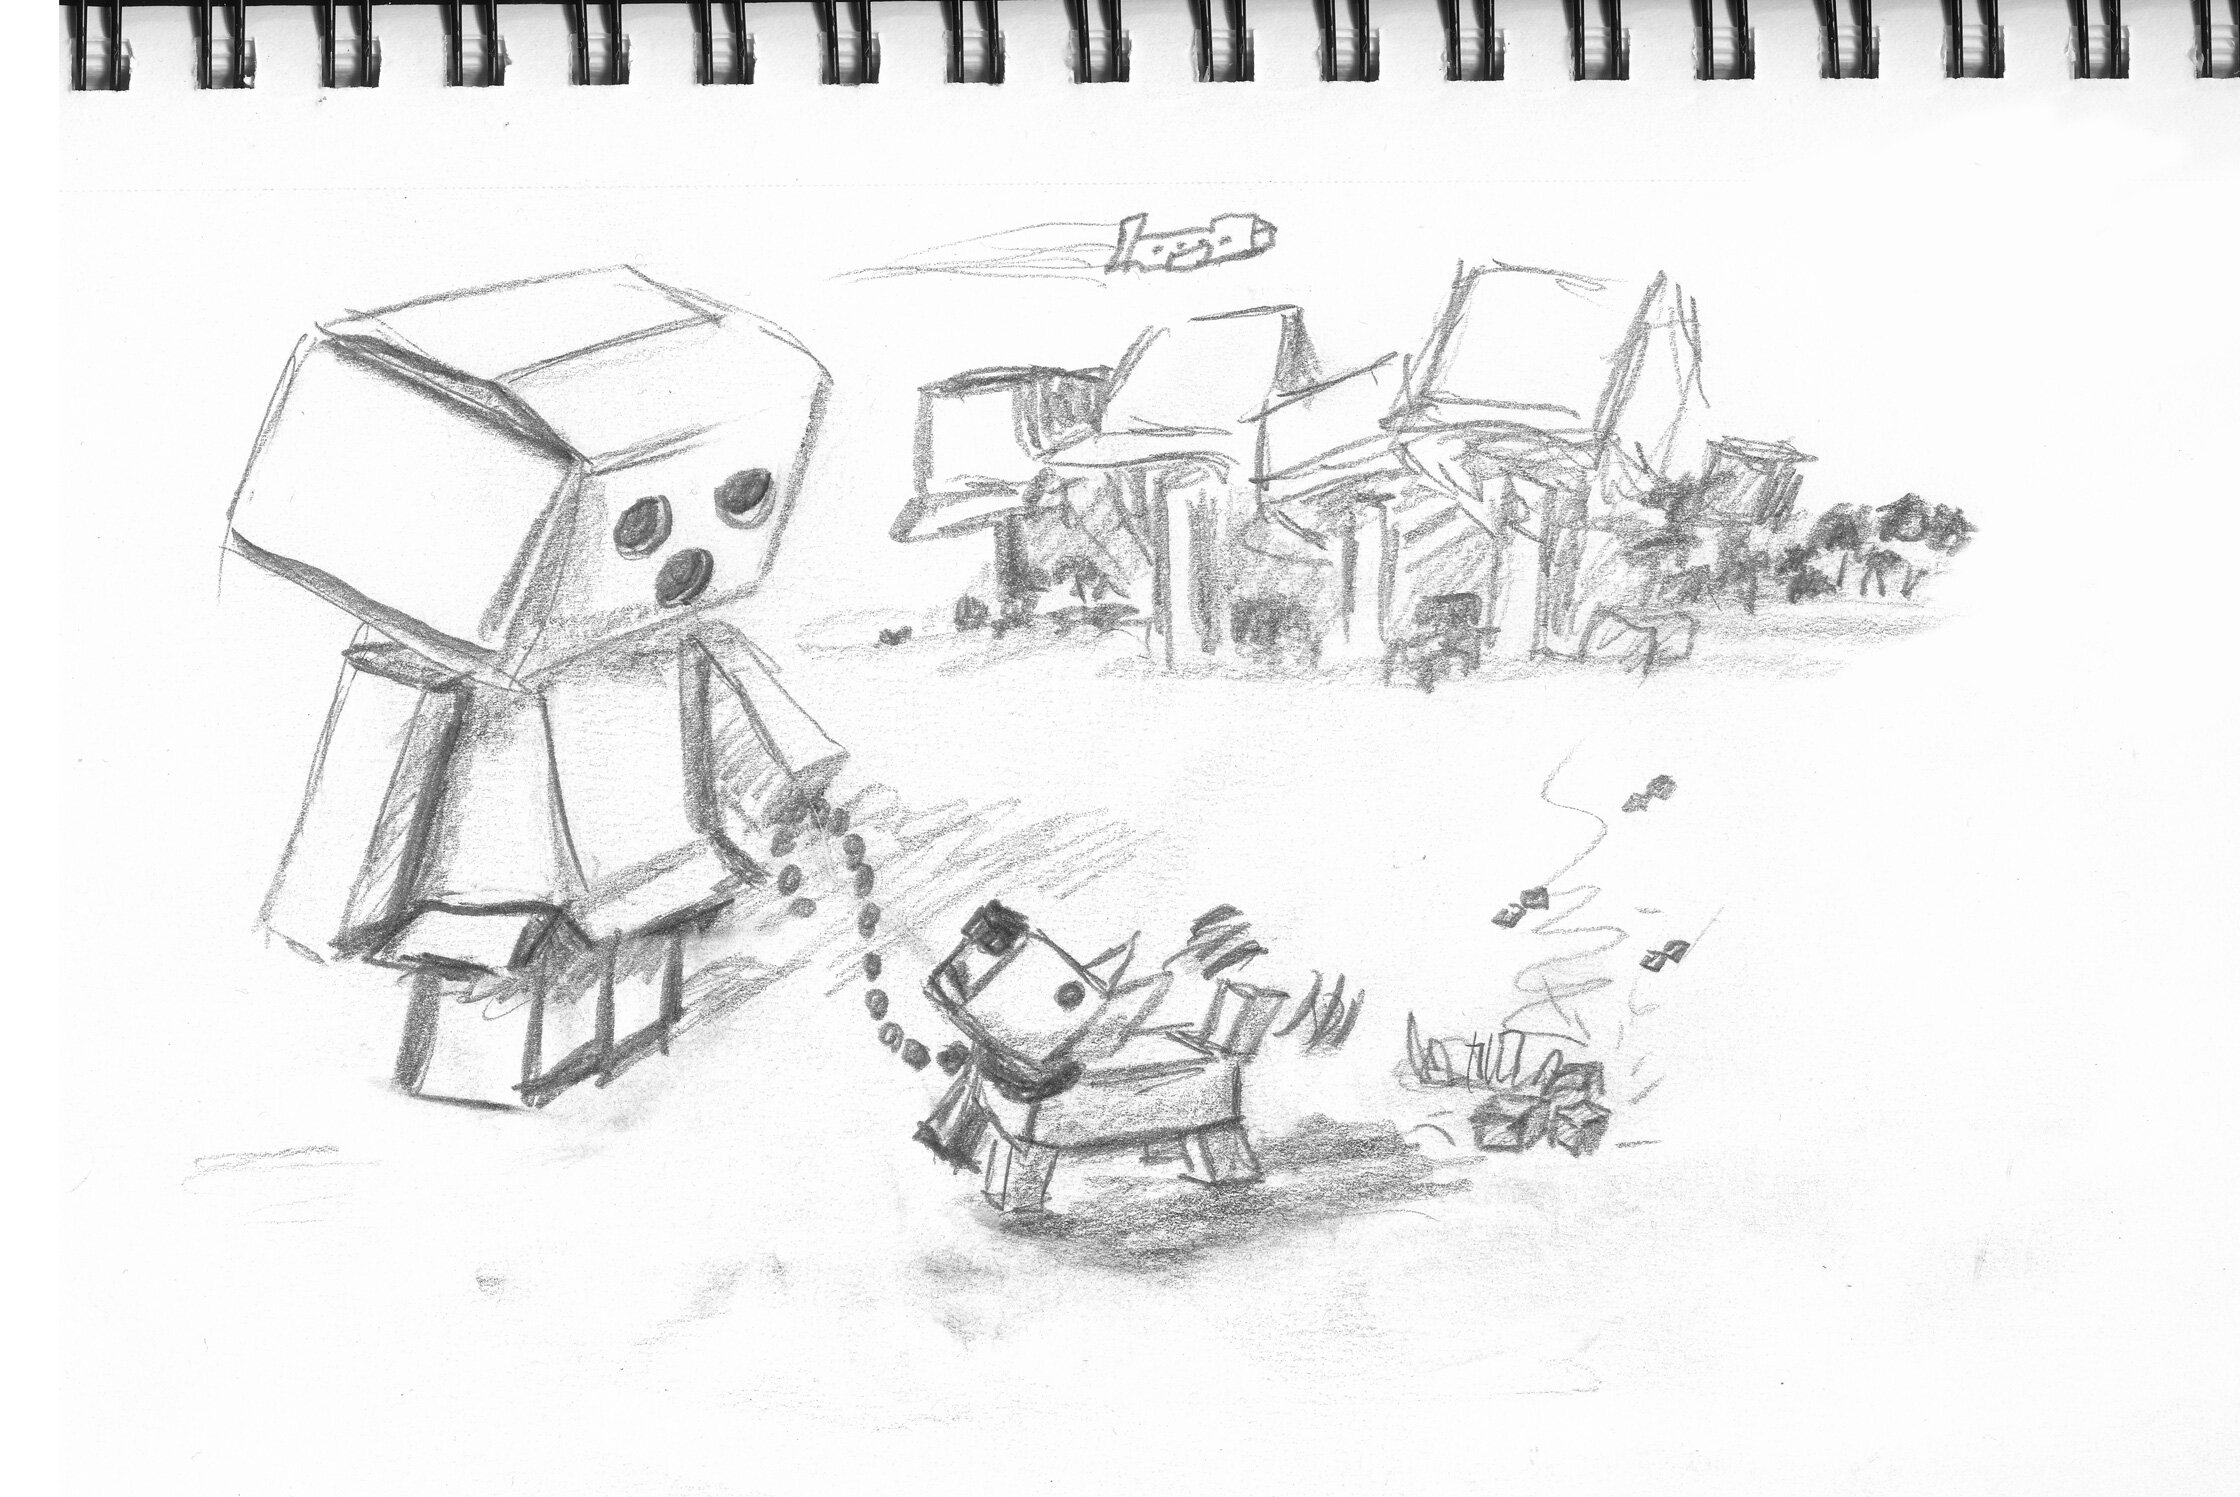 Boxy and Boxter rough sketch